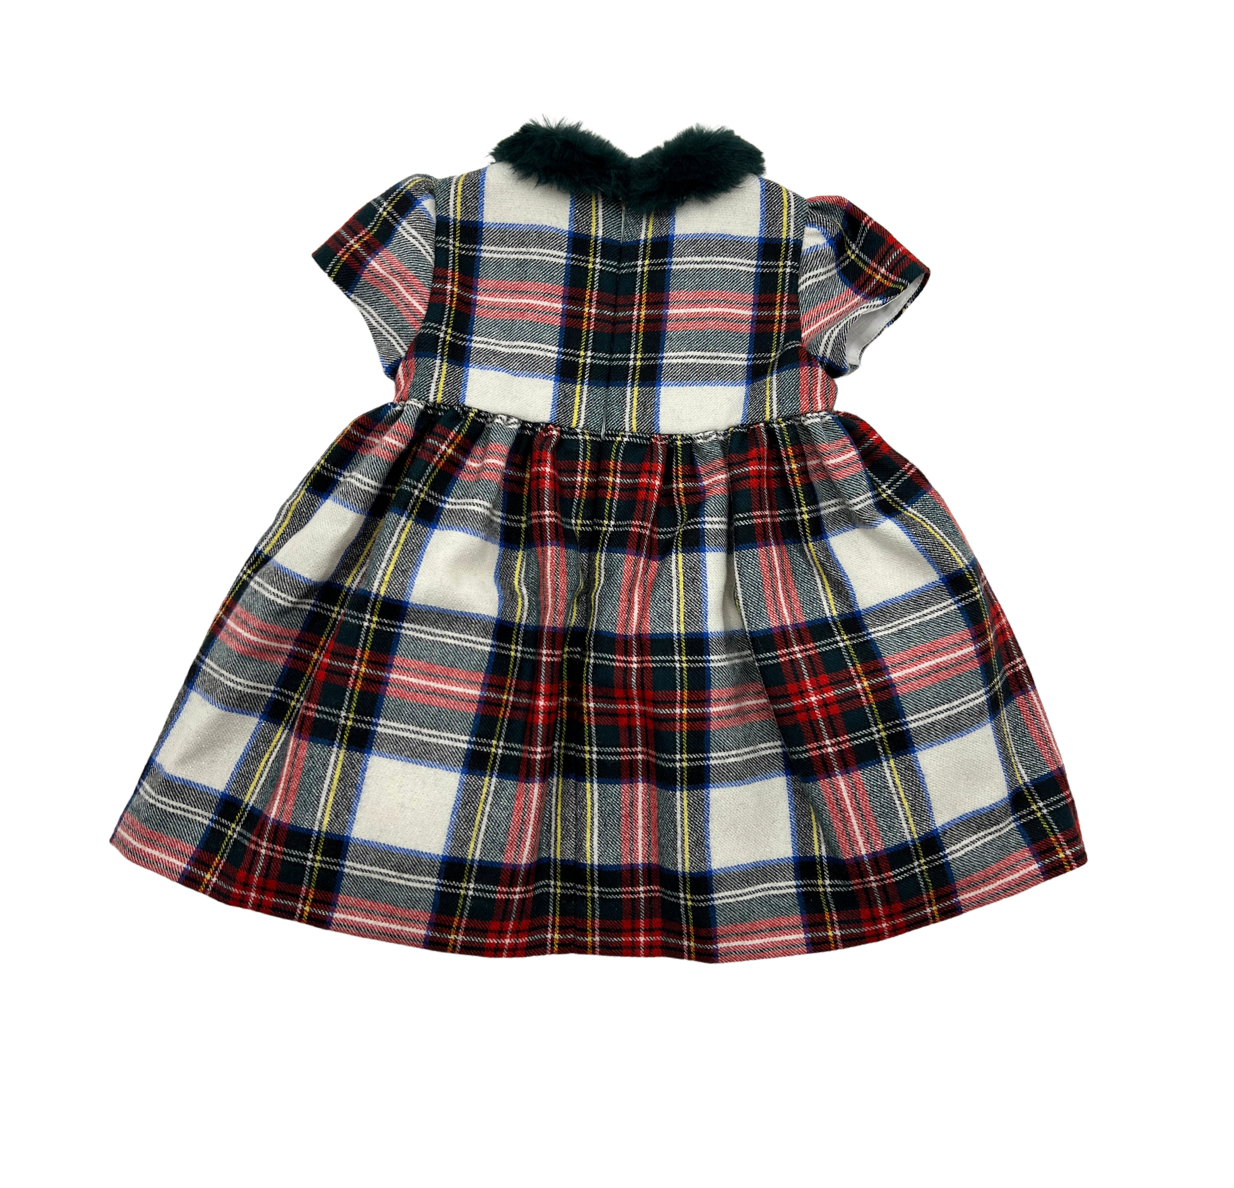 IL GUFO - Checked woolen dress - 1 year old